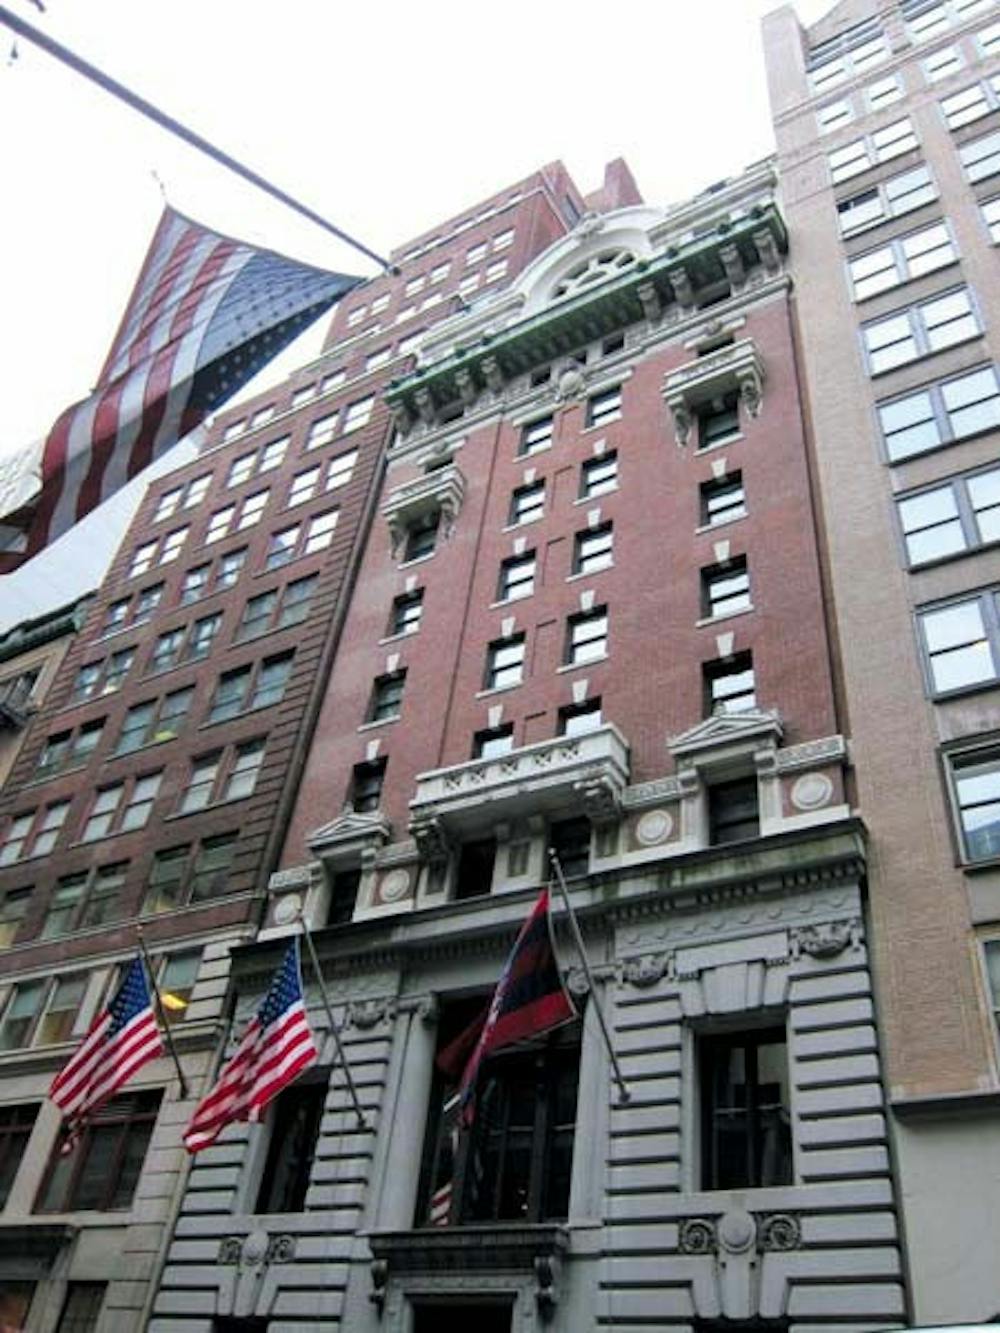 	The Penn Club of New York is an historic New York landmark and a center for alumni networking. This summer, it has offered a deal to undergraduates for summertime membership.